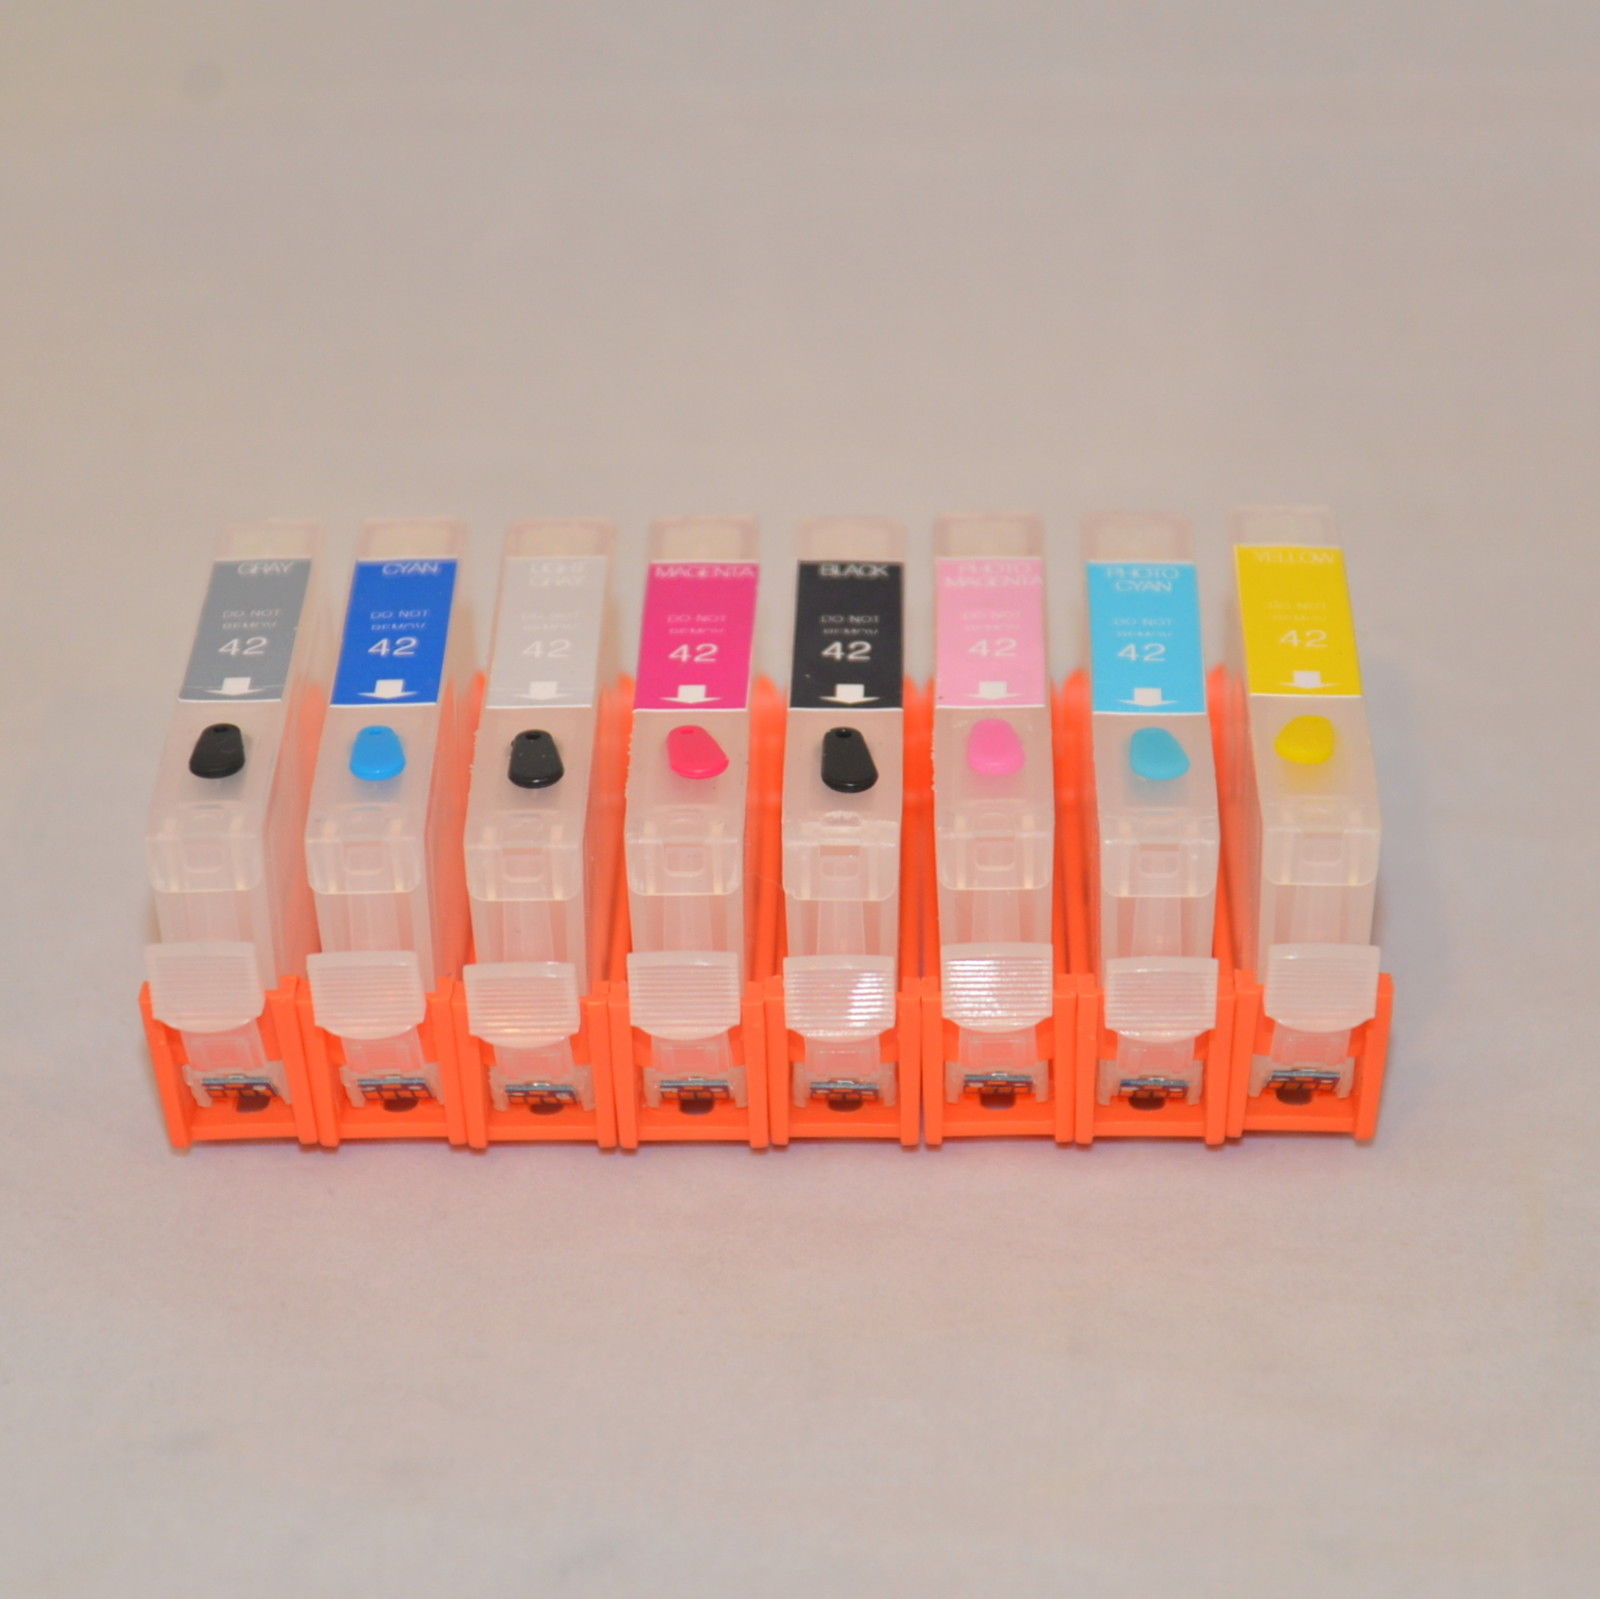 8 Empty Refillable Ink Cartridge for Canon Pro 100 CLI-42 with c